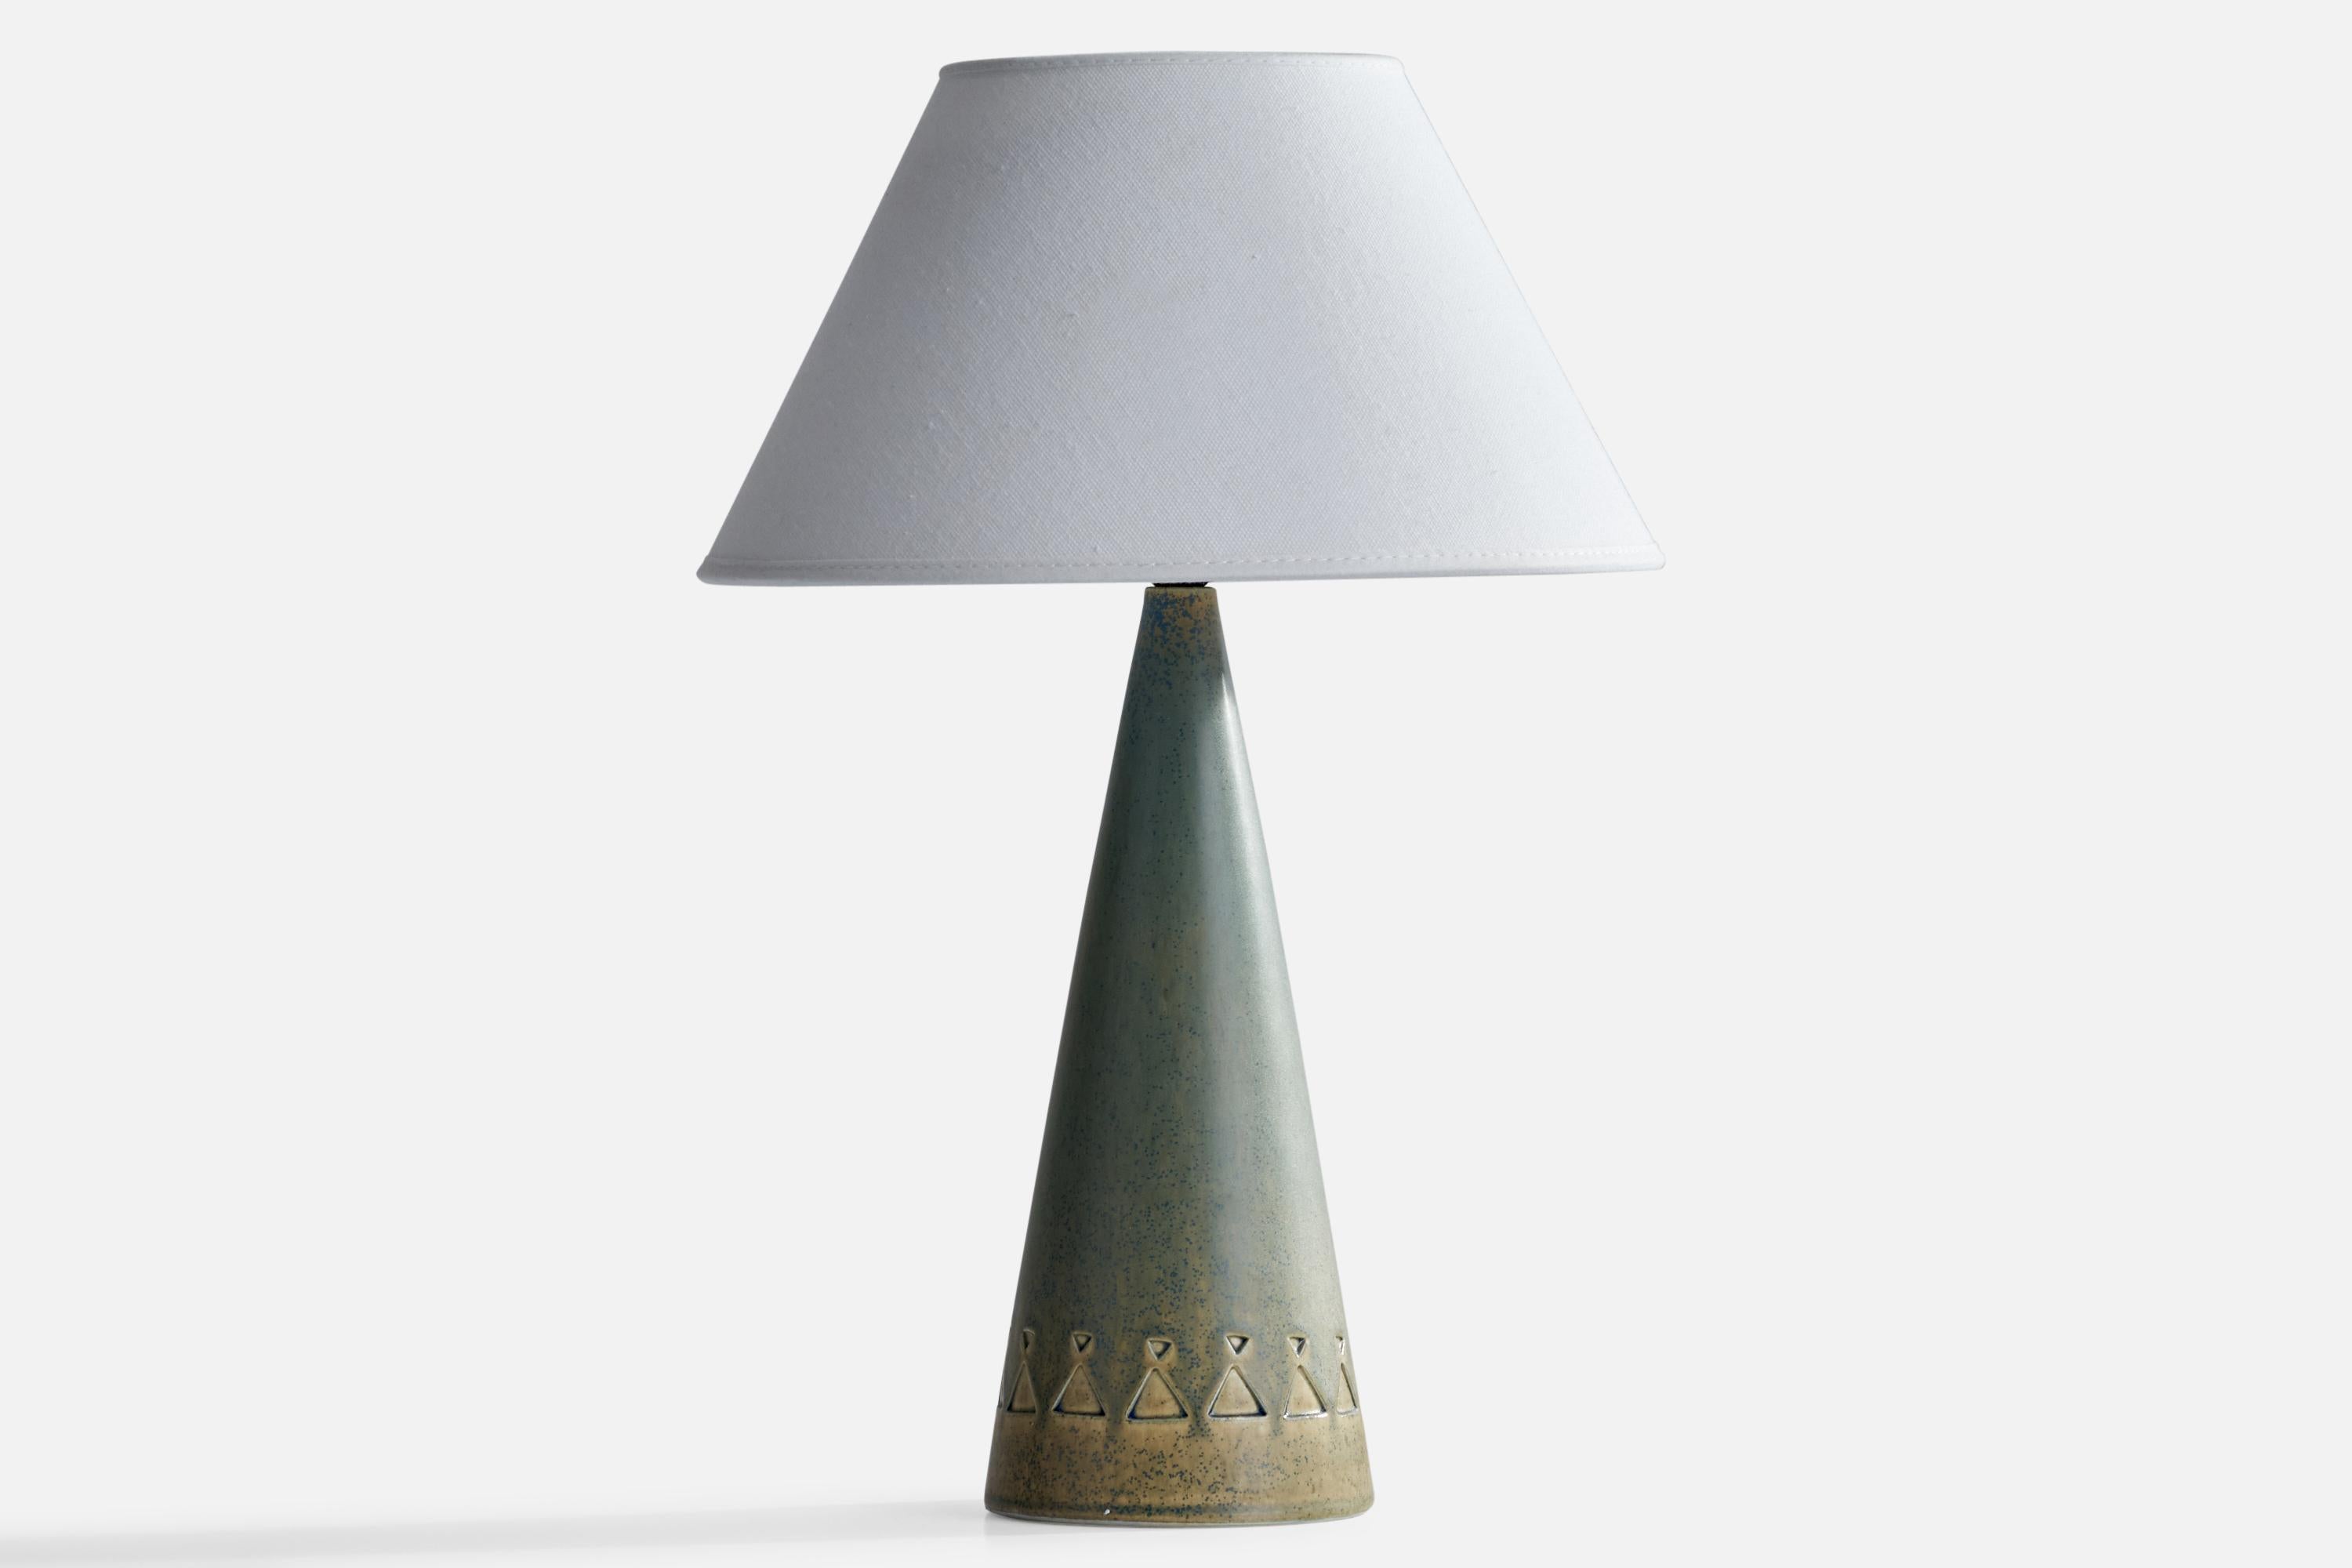 A grey blue-glazed ceramic table lamp designed and produced by Jie Gantofta, Sweden, 1970s.

Dimensions of Lamp (inches): 12” H x 4” Diameter
Dimensions of Shade (inches): 4.5”  Top Diameter x 9.75”  Bottom Diameter x 5.5” H
Dimensions of Lamp with